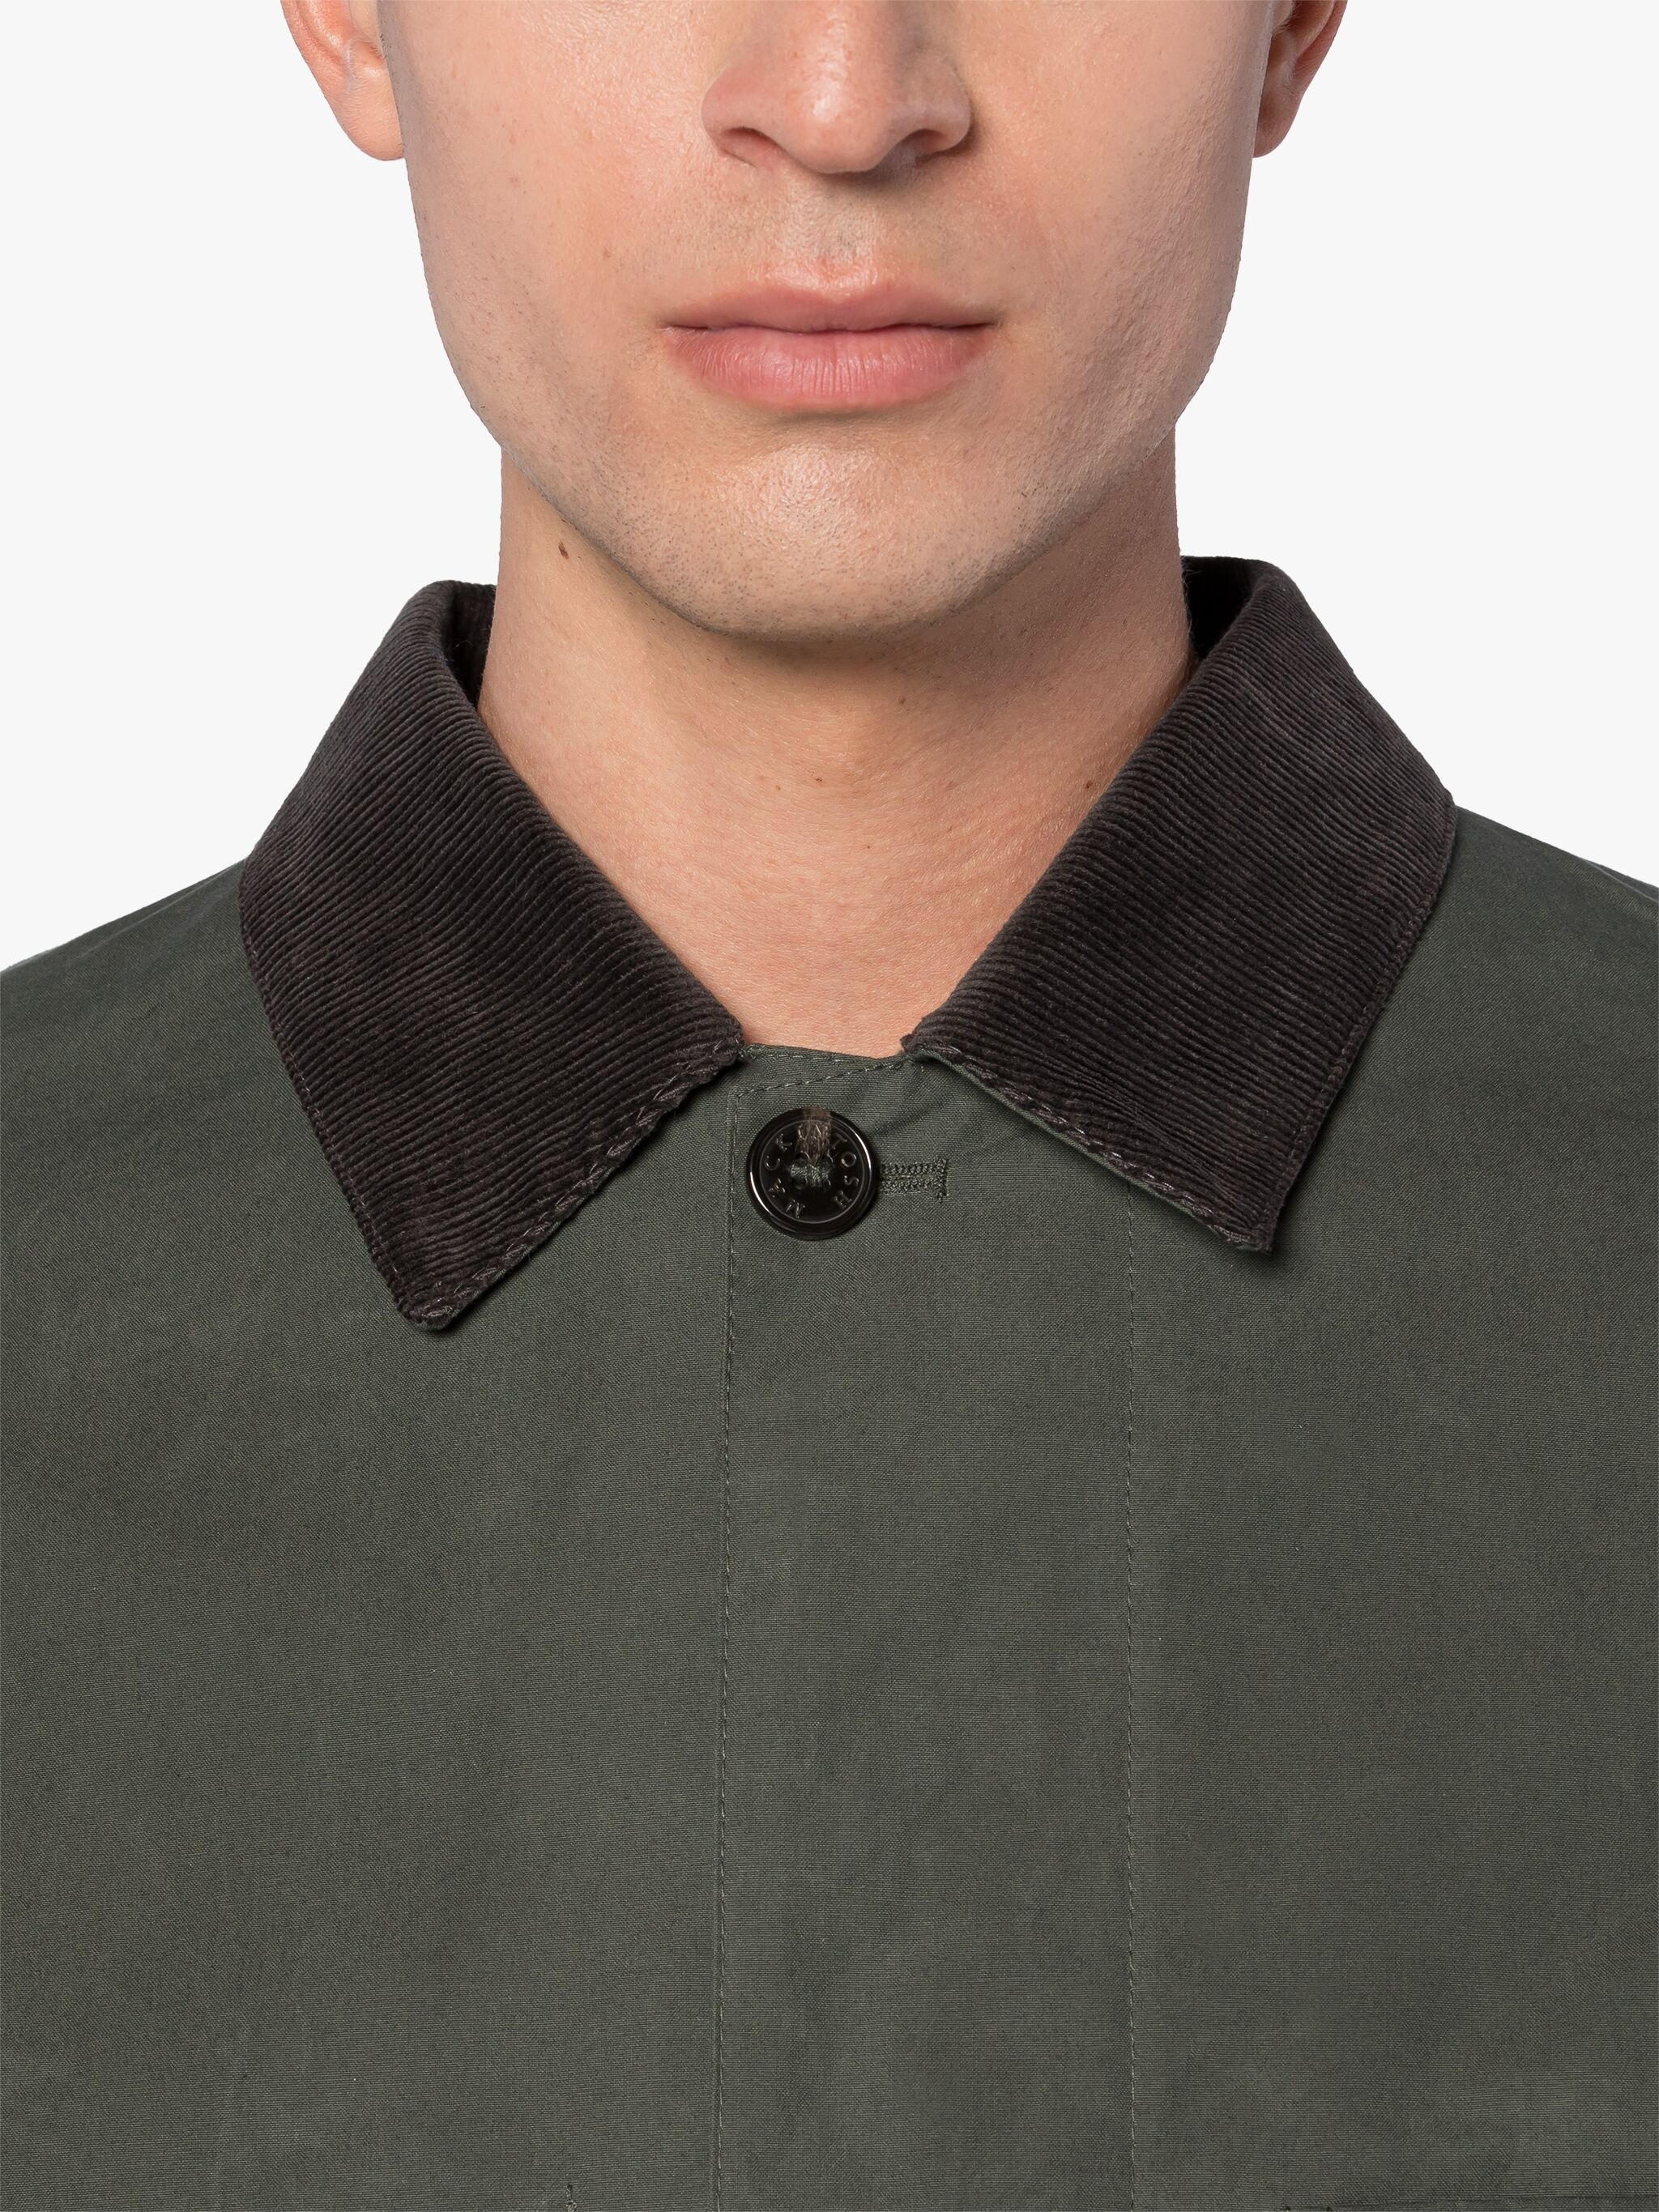 DRIZZLE GREEN WAXED COTTON CHORE JACKET - 5